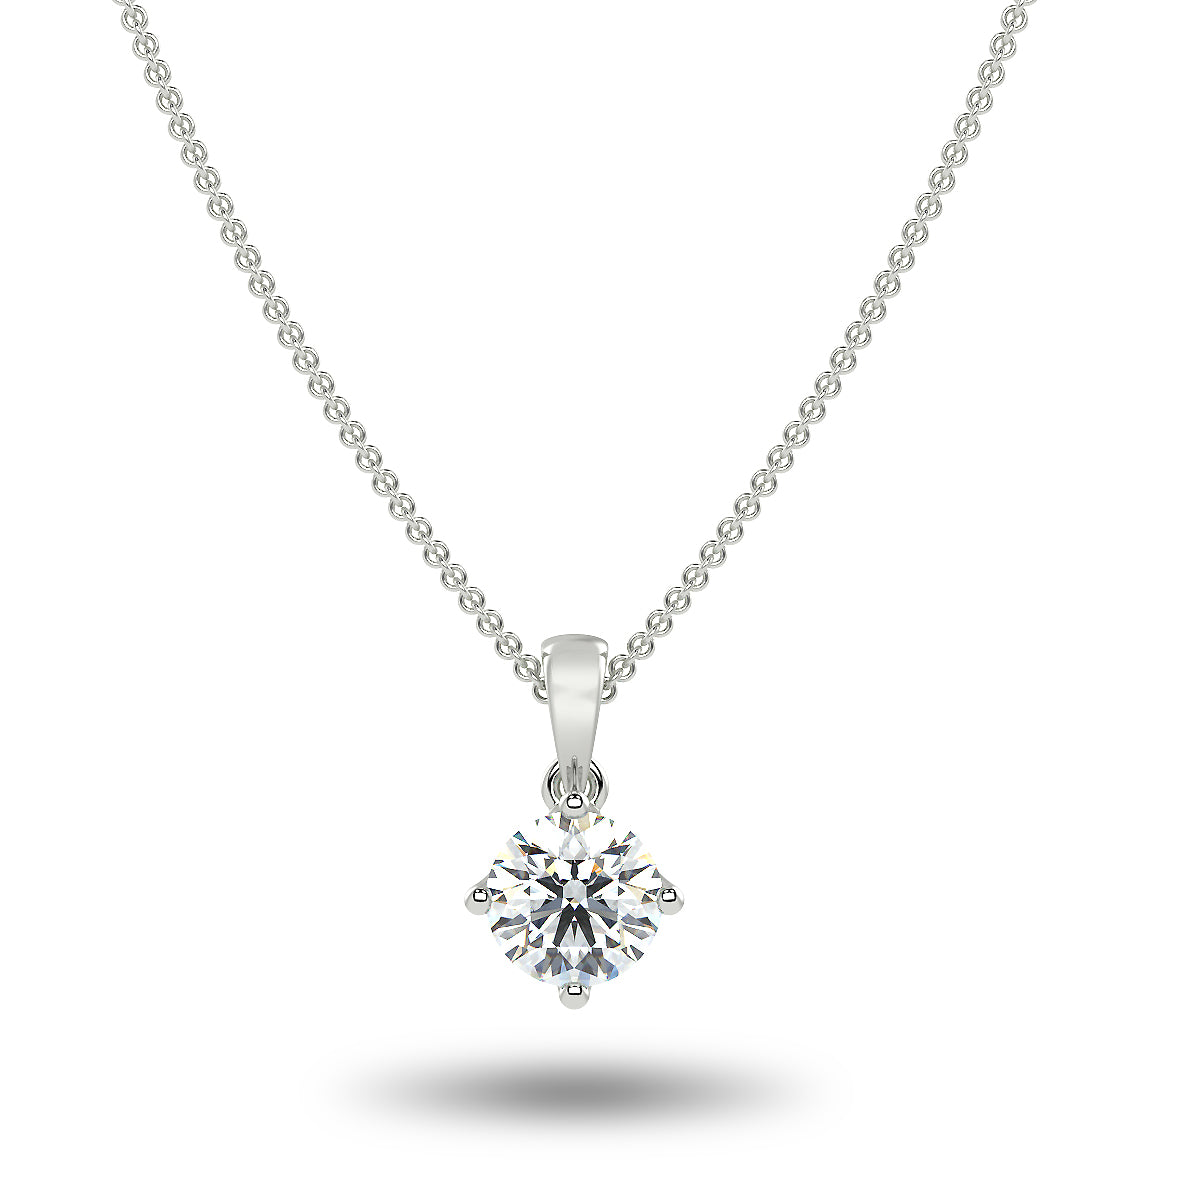 Sirius Solitaire Necklace - White Gold (0.80 Ct. Tw.)